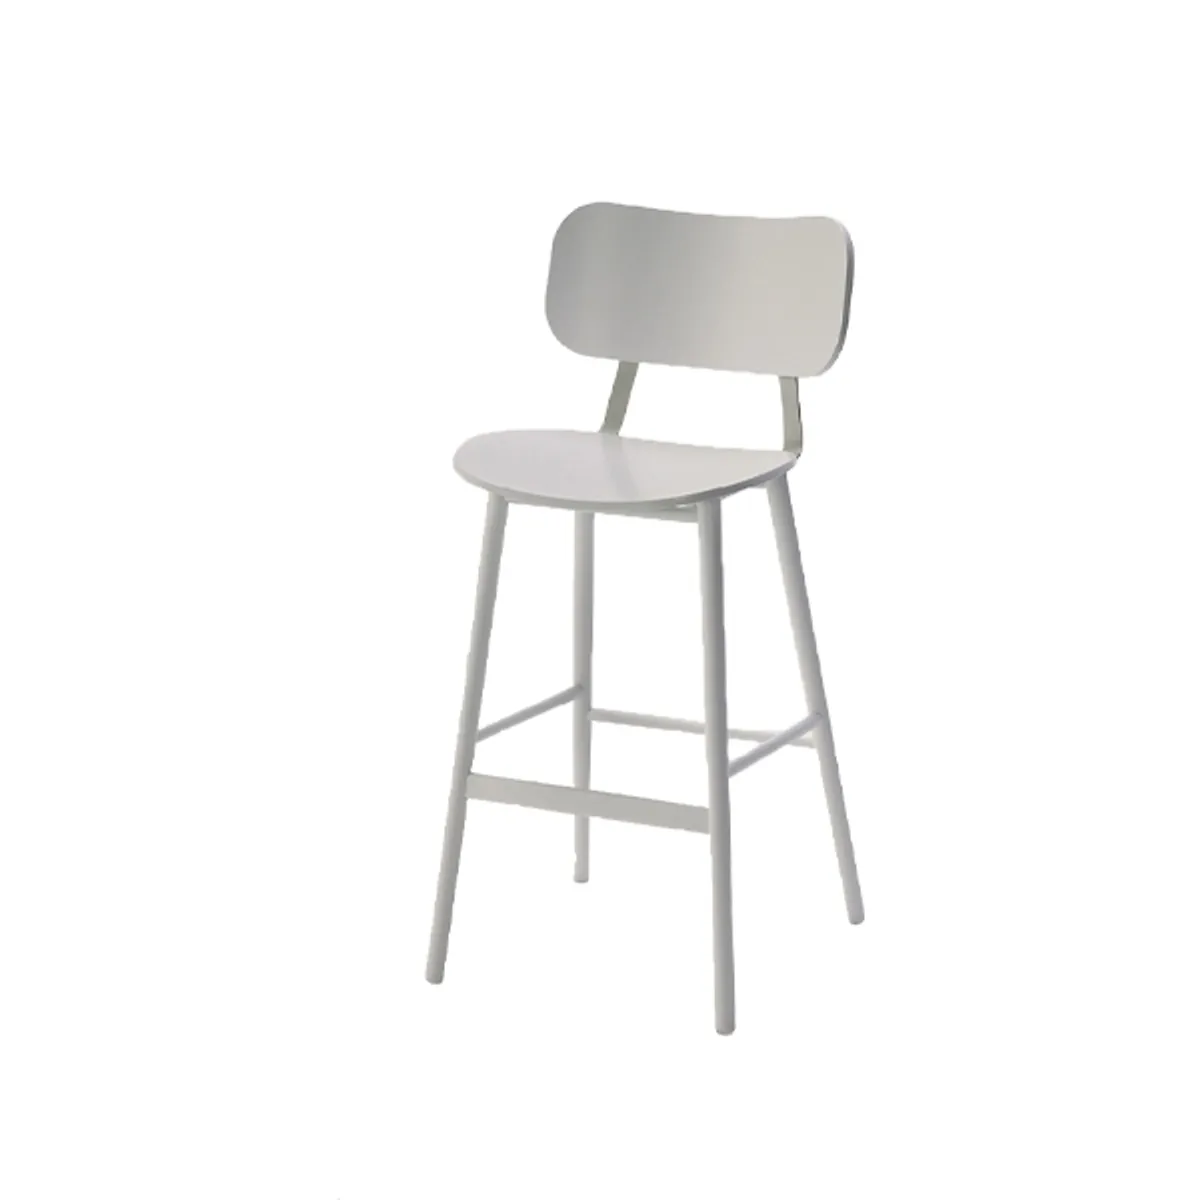 Demie bar stool Inside Out Contracts3